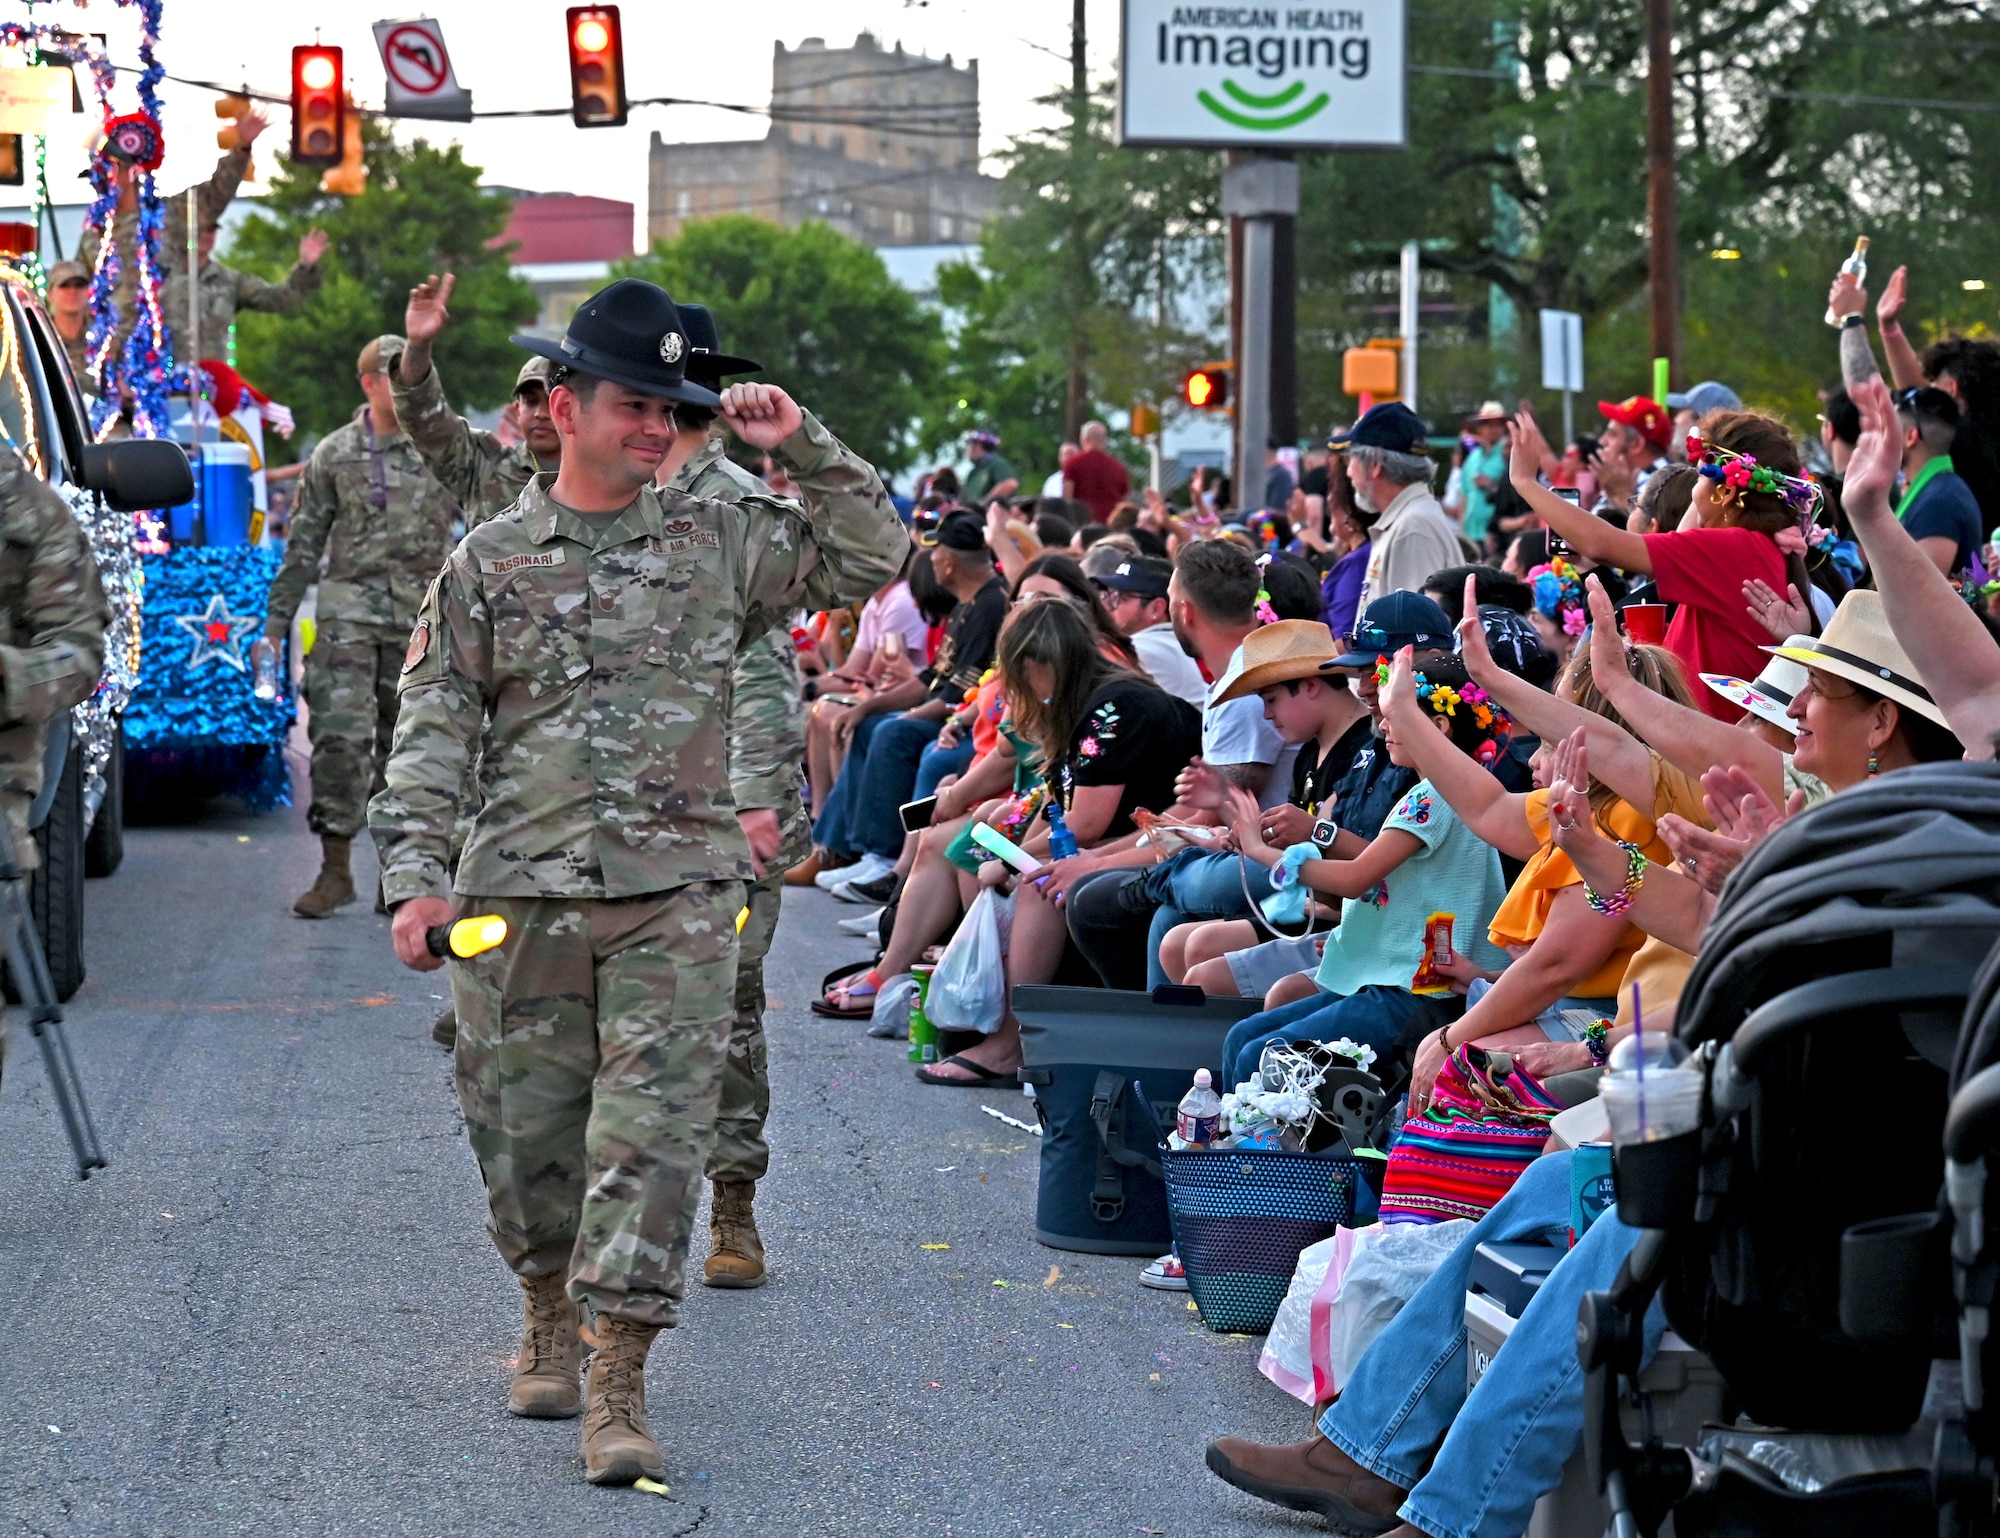 Master Sgt. Anthony Tassinari, 340th Flying Training Group military training instructor, greets the crowd while walking in San Antonio's 74th annual Fiesta Flambeau parade, April 9, 2022. The illuminated parade attracted over 750,000 spectators after a 2-year break following the COVID-19 lockdown and restrictions. (U.S. Air Force photo by Master Sgt. Samantha Mathison)